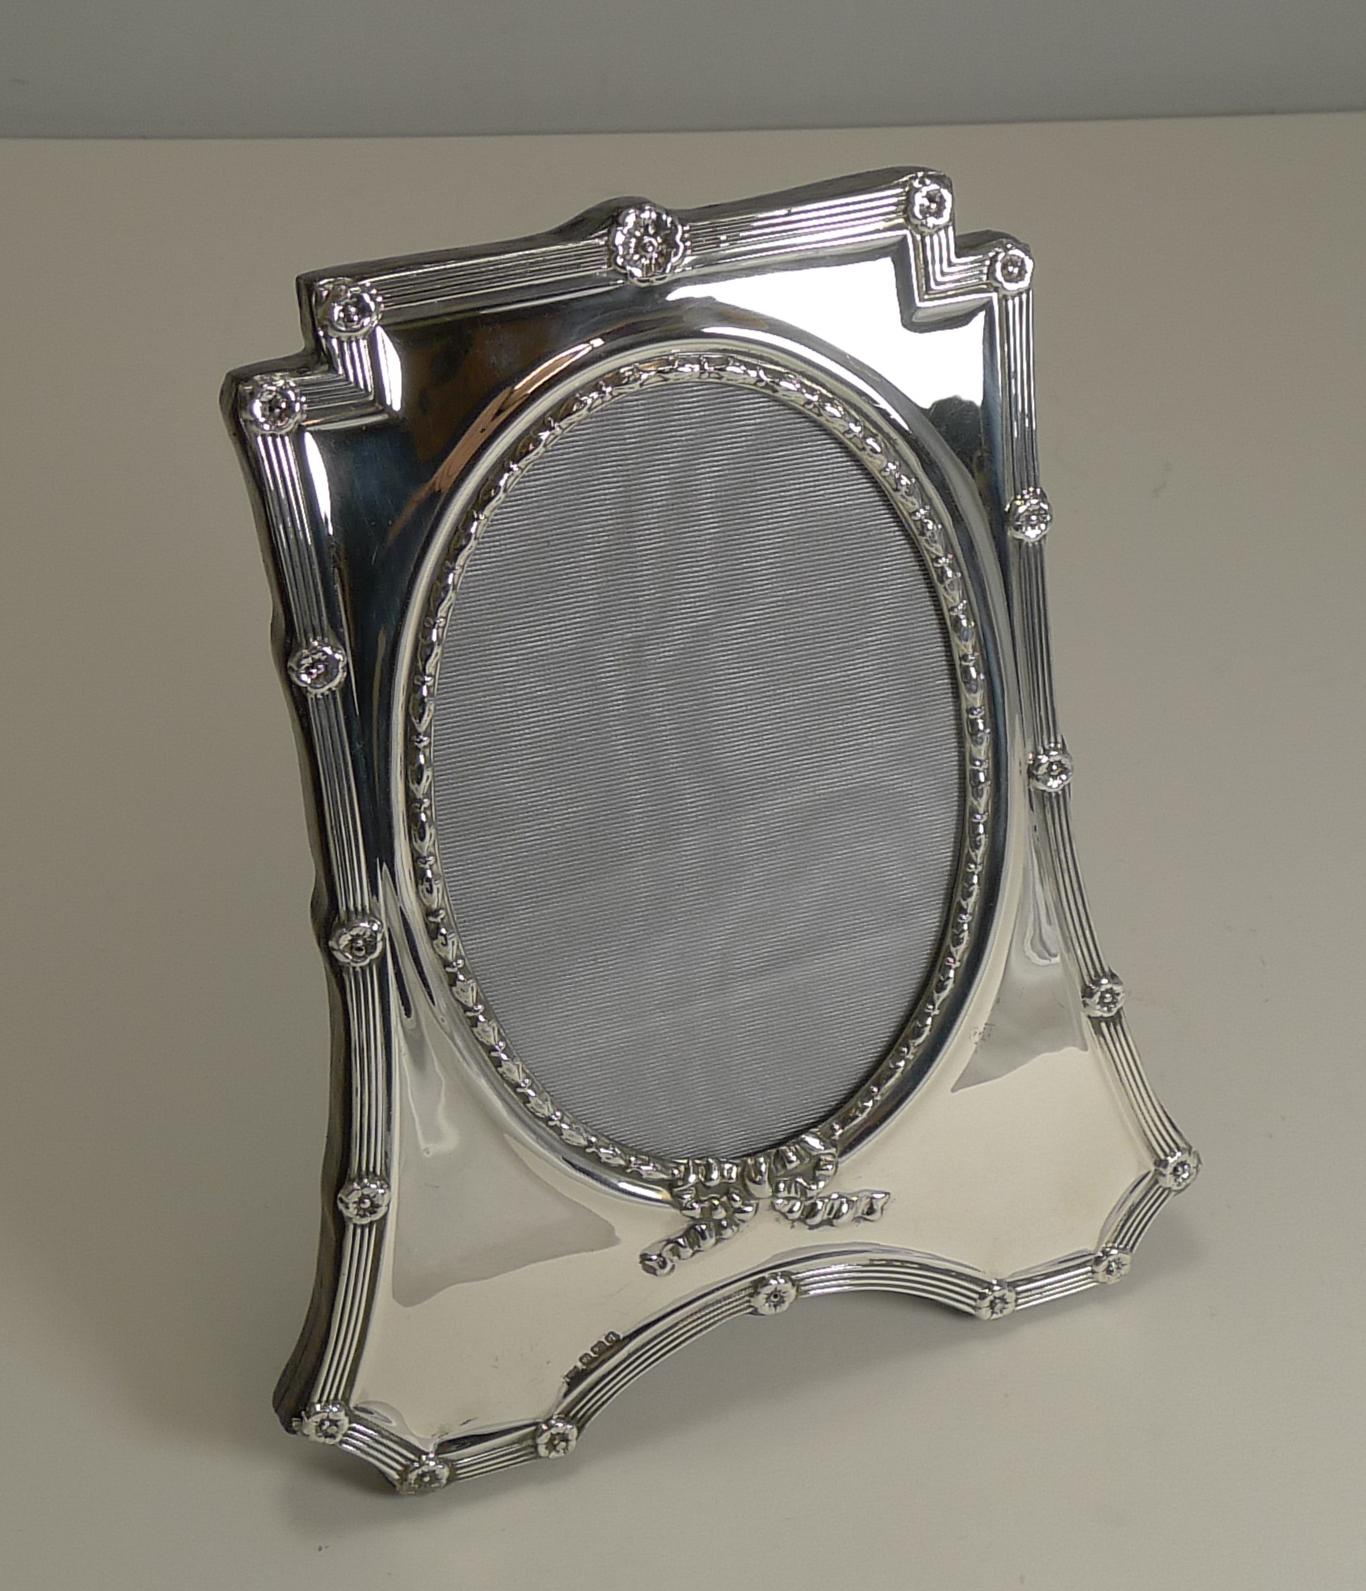 Edwardian Antique English Sterling Silver Photograph Frame by Mappin and Webb, 1908